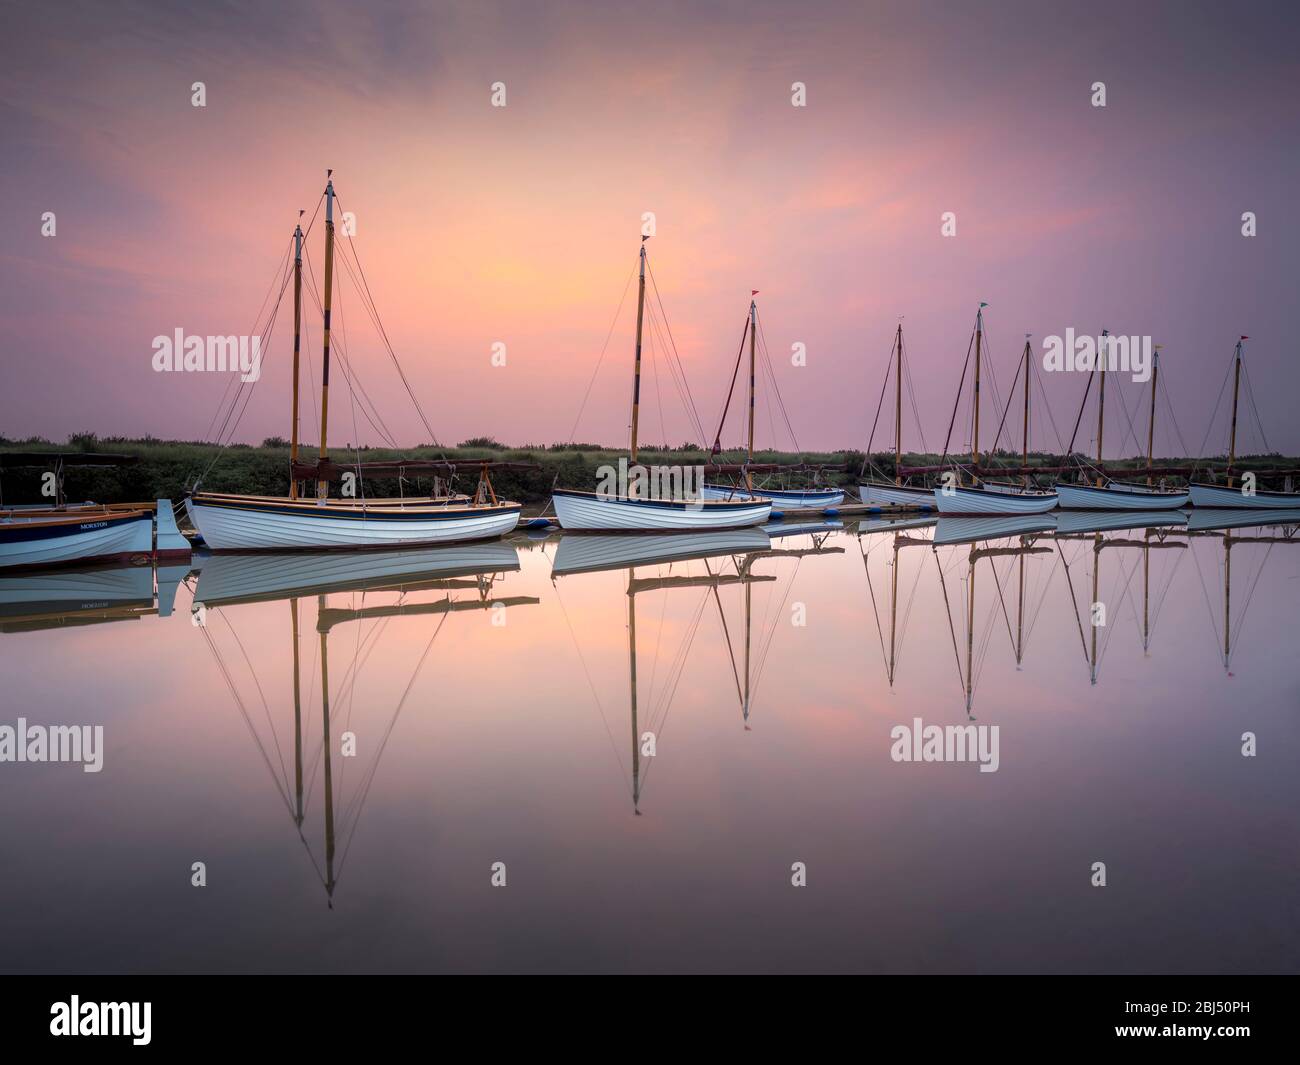 A line of identical sailing boats at dawn on a calm spring morning. Stock Photo